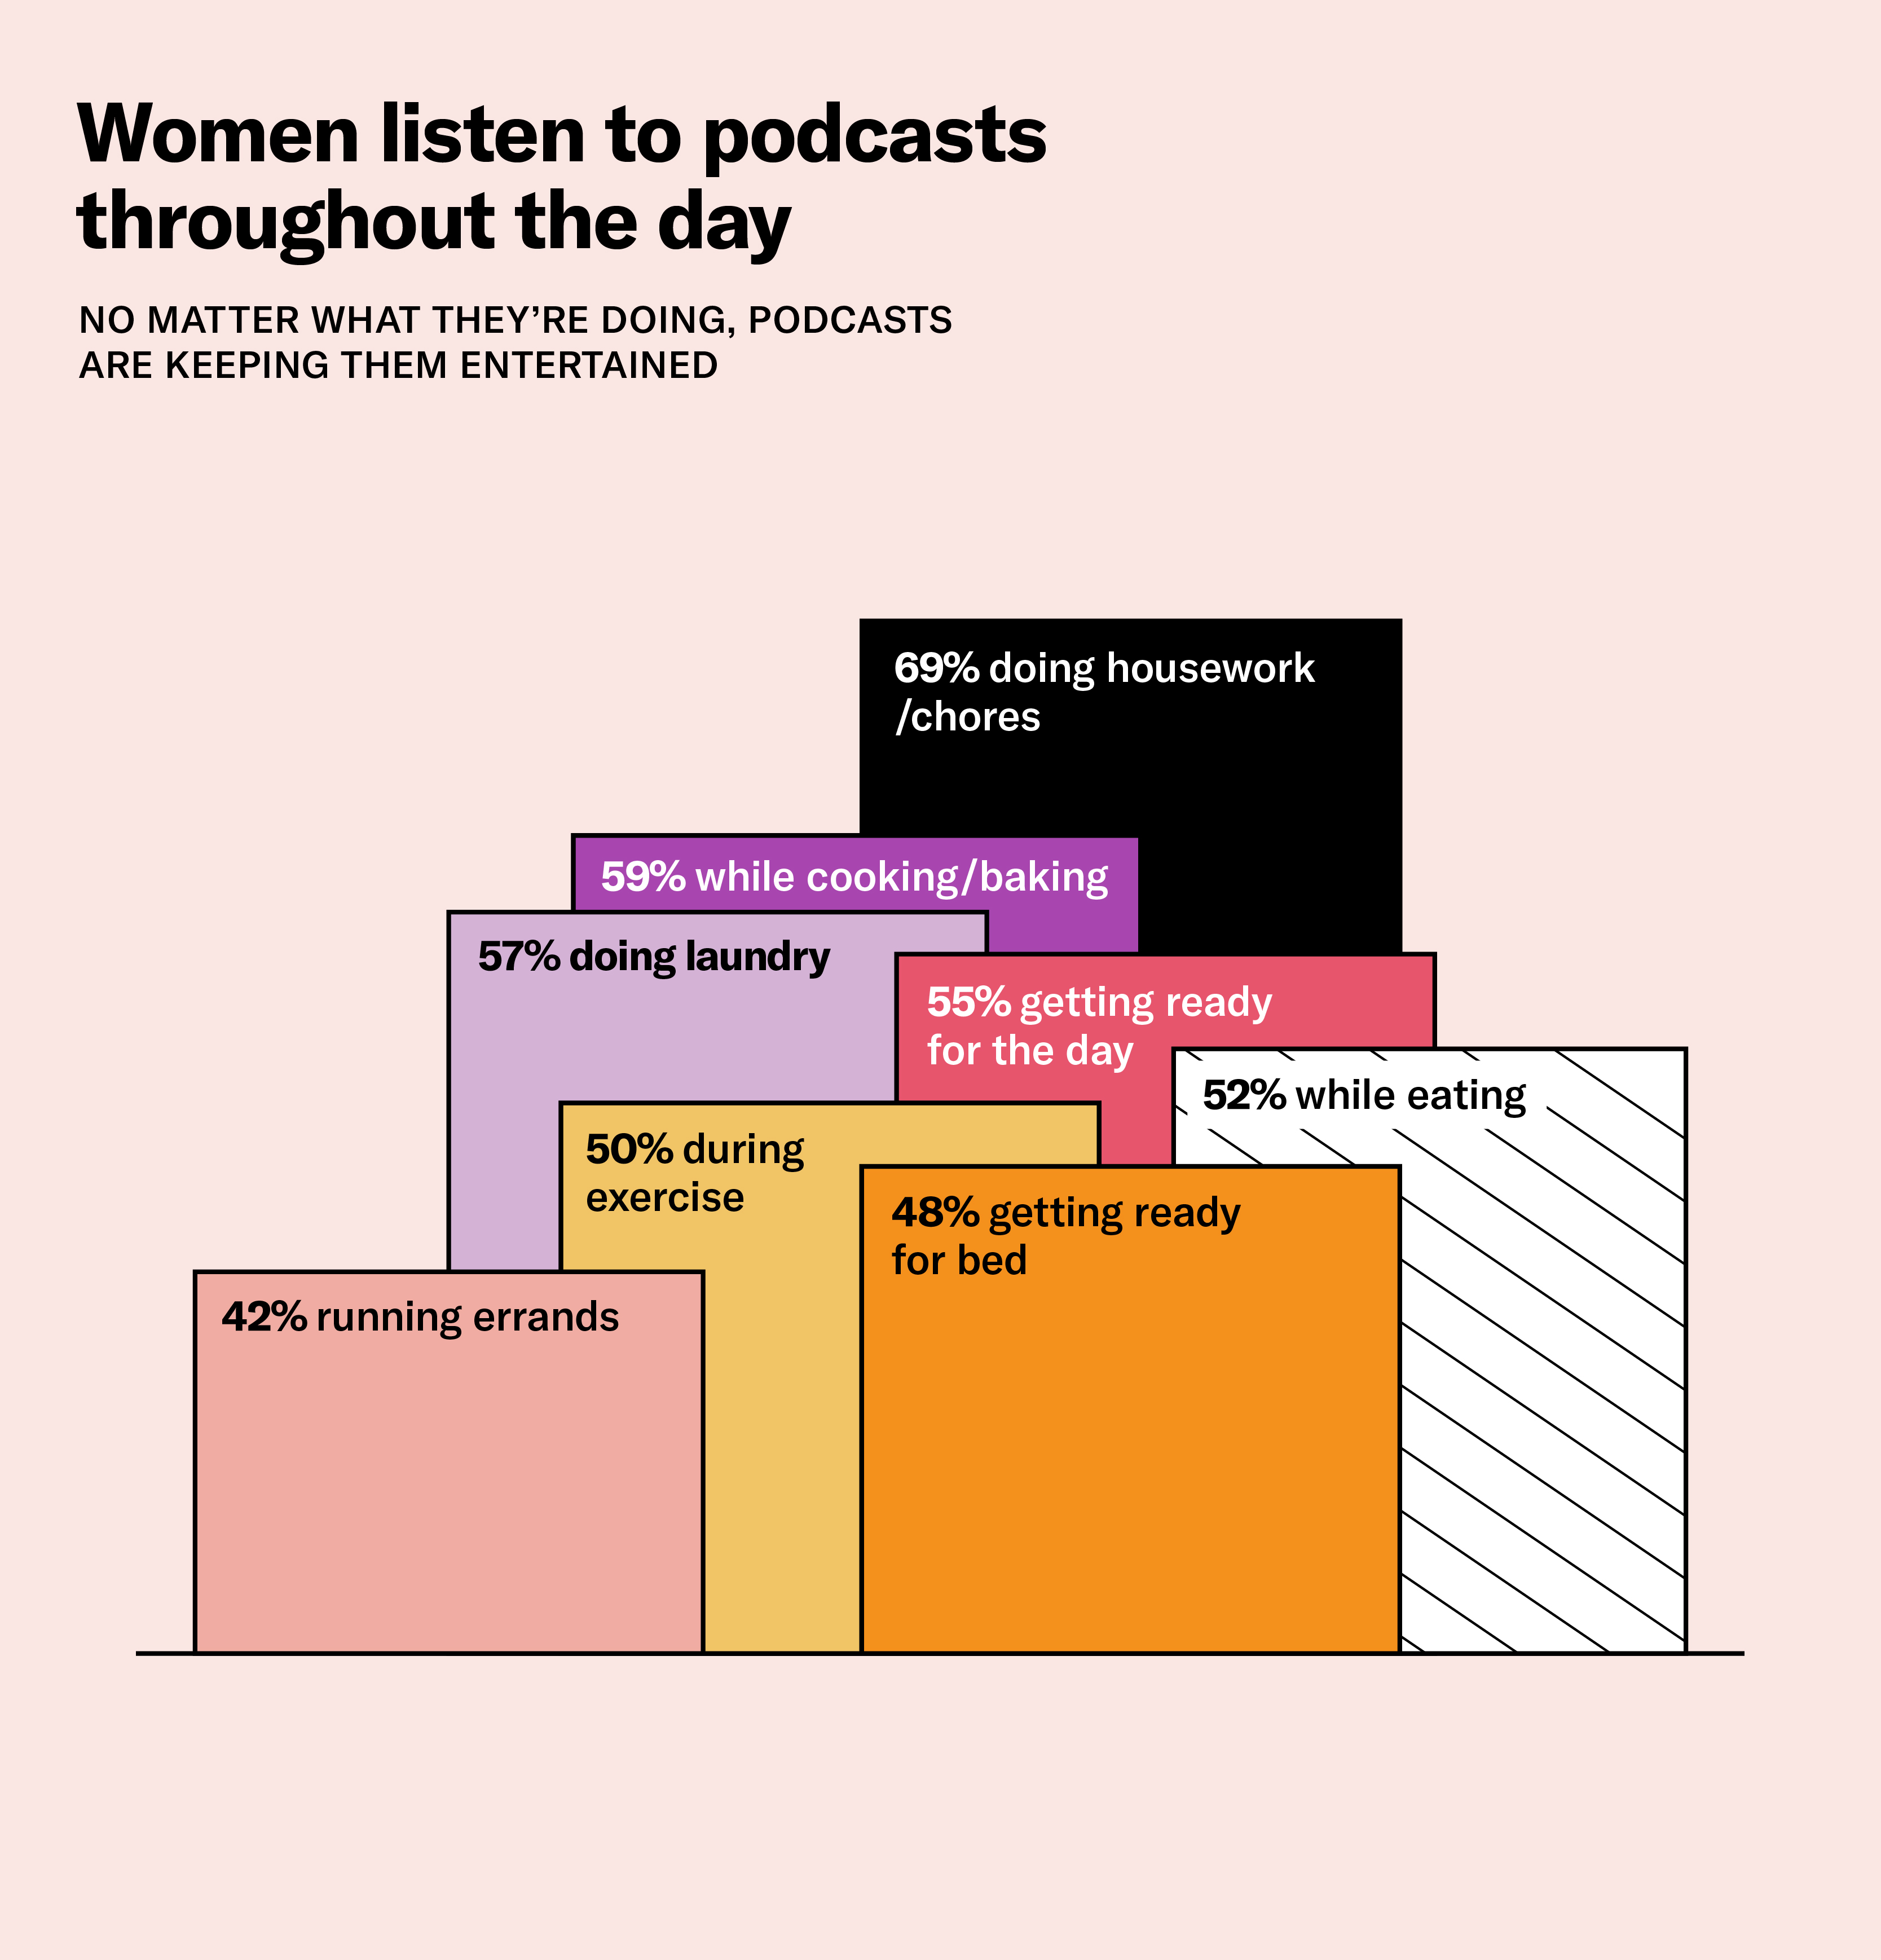 Women listen to podcasts throughout the day